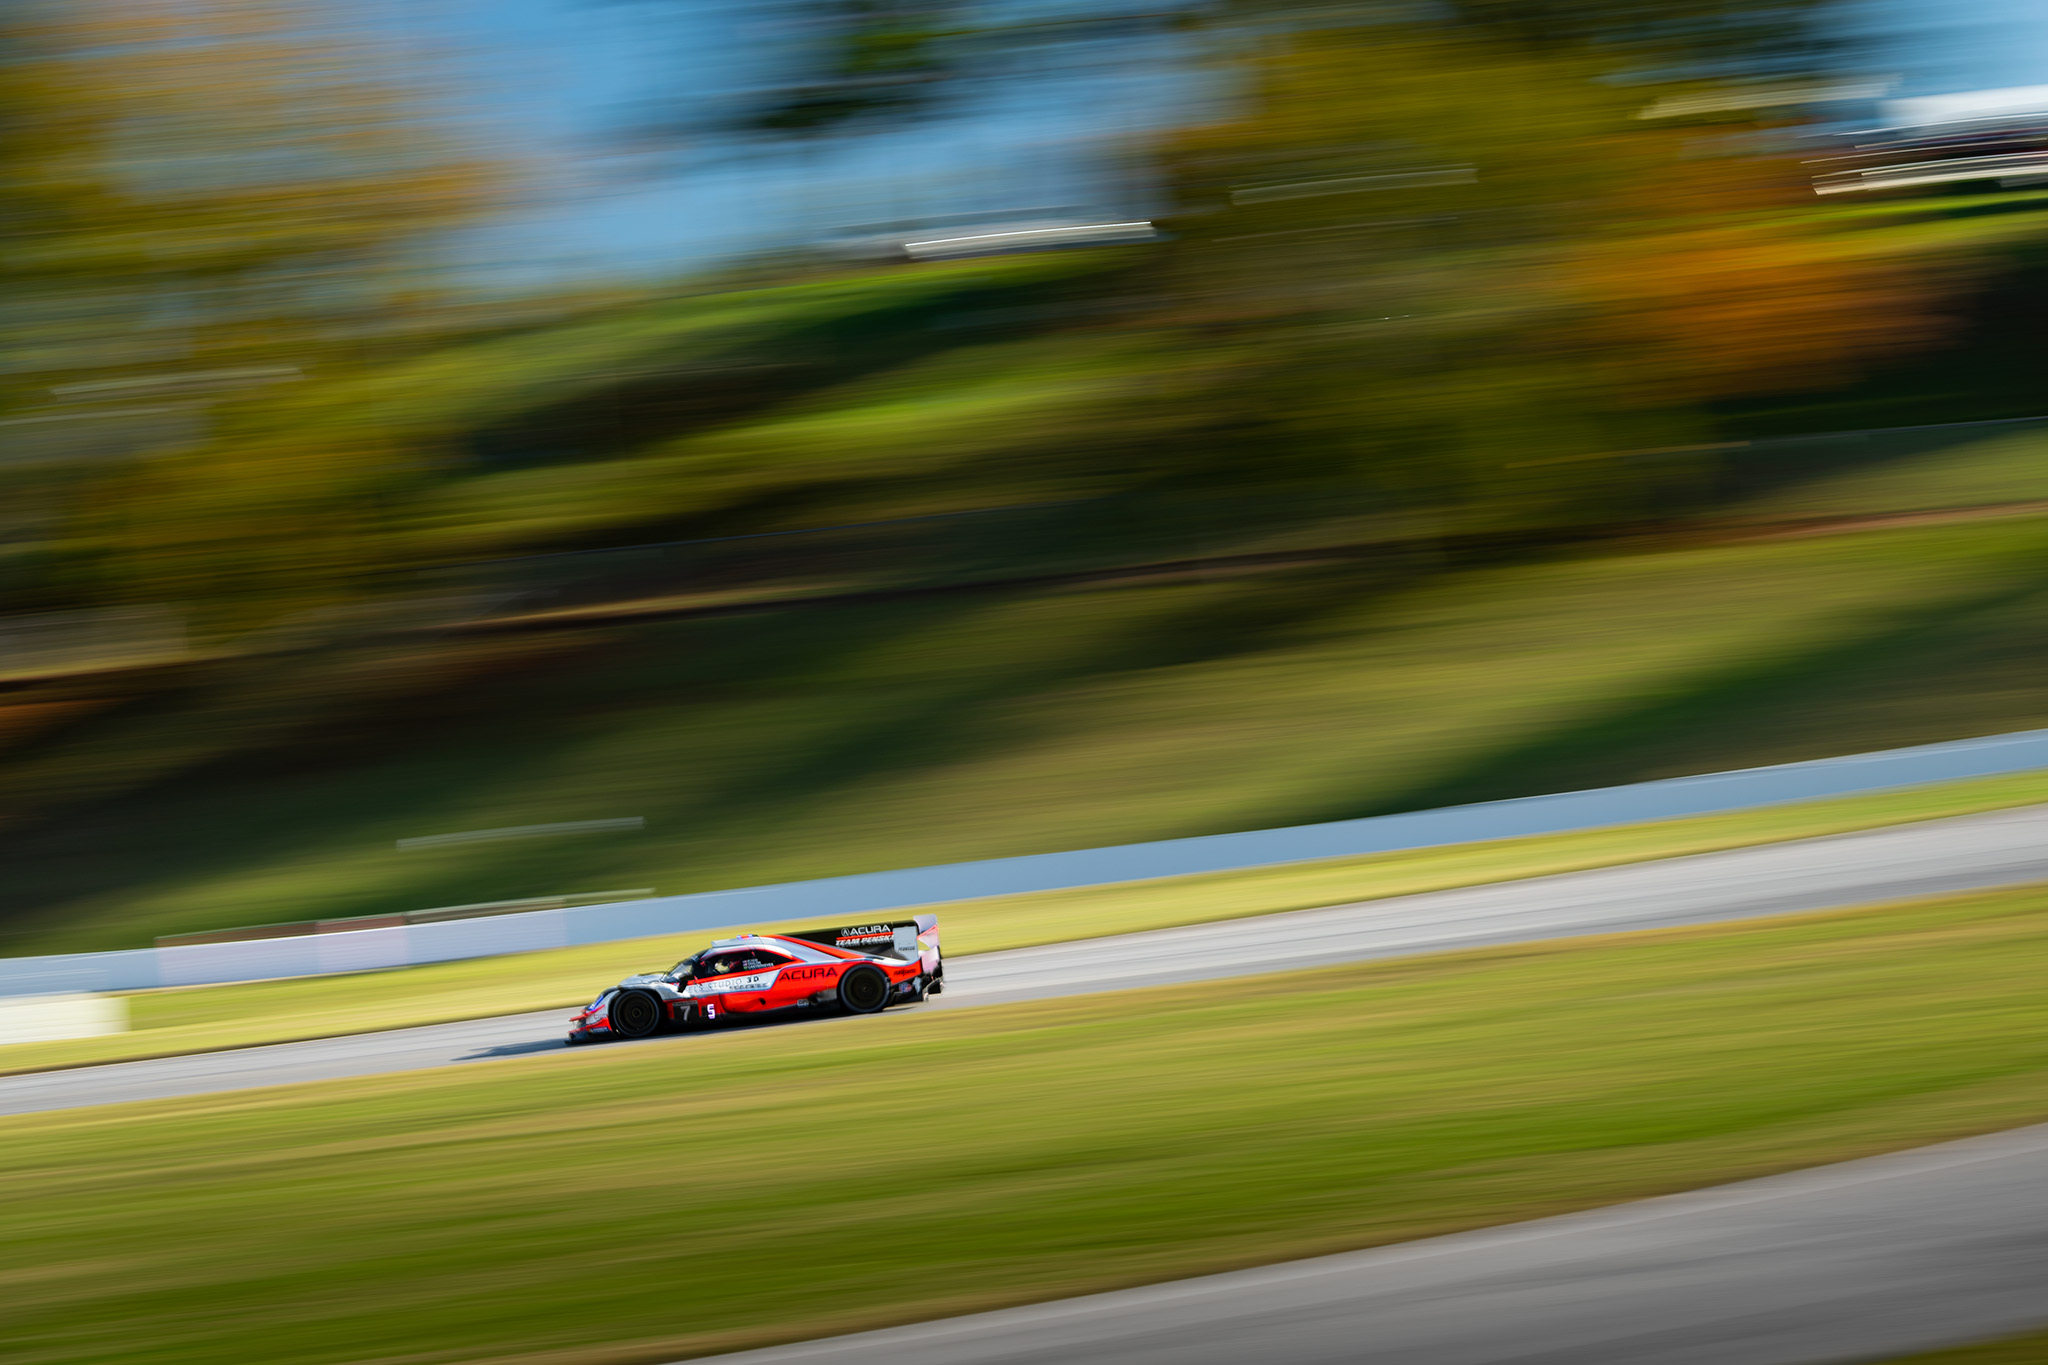 Helio Castroneves and the Acura Team Penske ARX-05 DPi, at IMSA Petit Le Mans at Road Atlanta, motorsports photography by Luke Munnell